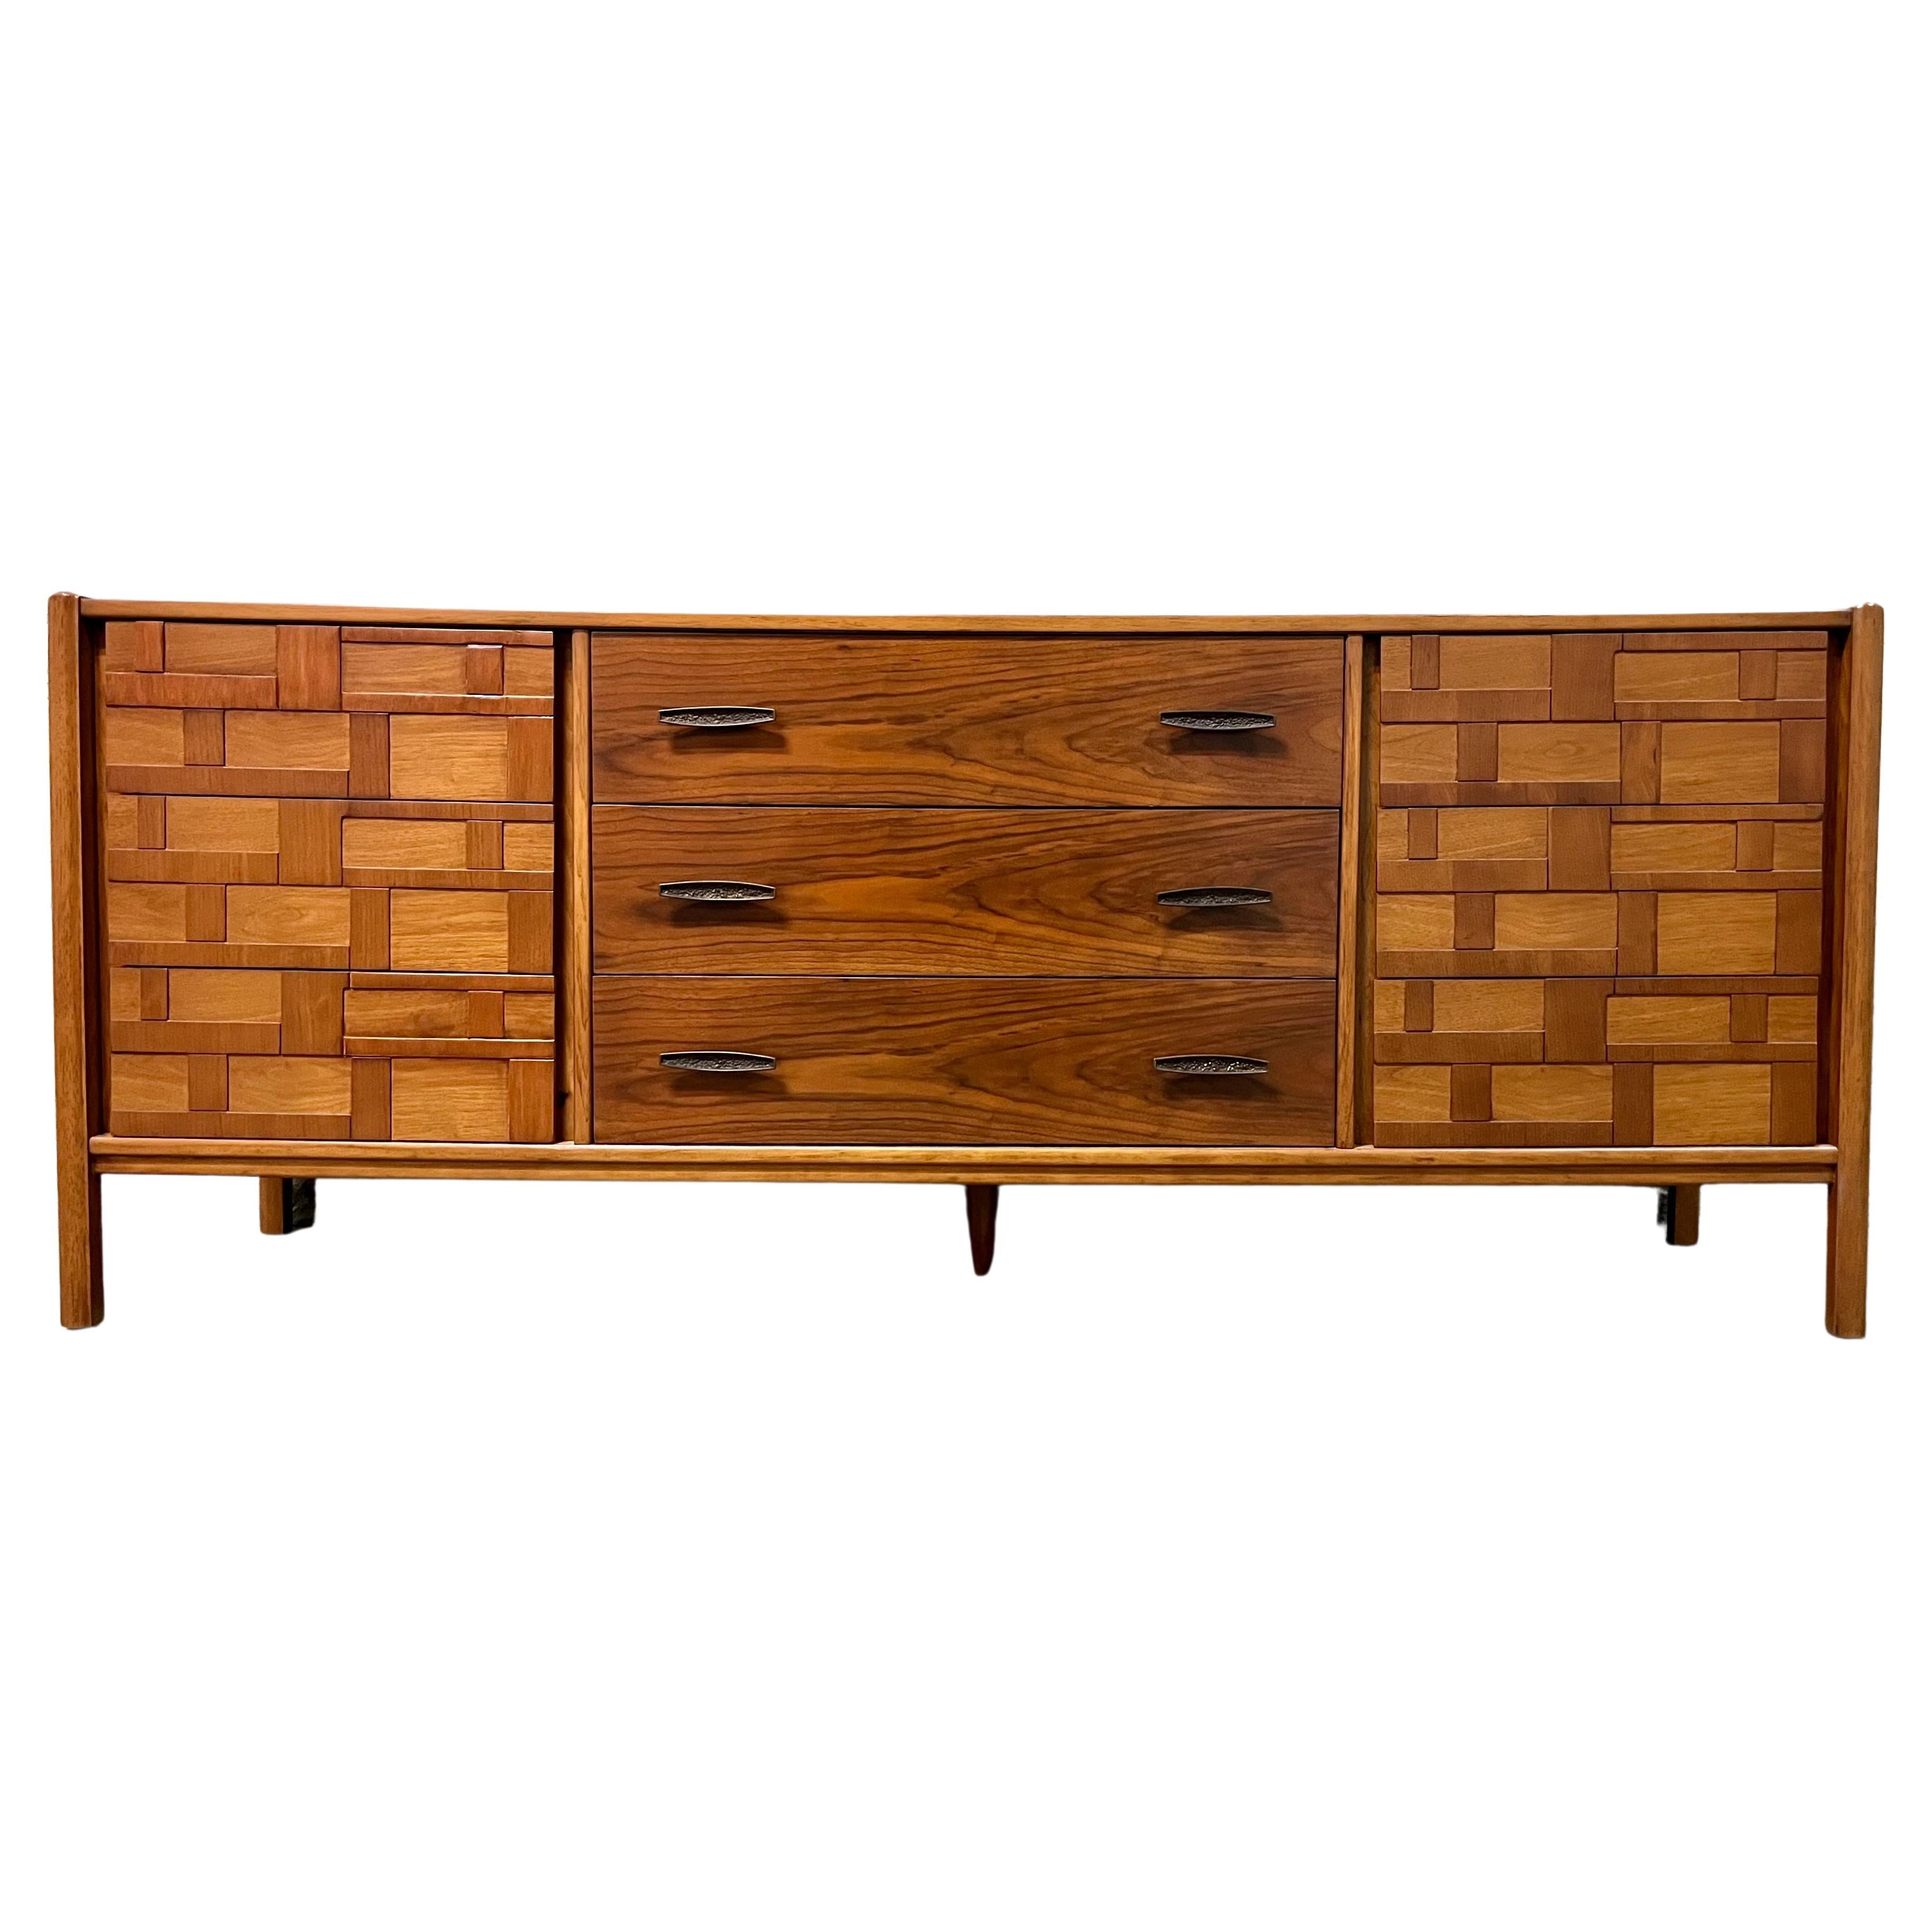 Vintage Mid Century Modern Brutalist Inspired Nine Drawers Dresser in the Paul Evans' Style. Circa 1960s 
Features a quintessential Mid Century Modern Design with a brutalist influence and nine dove tailed drawers six with sculpted side pulls and